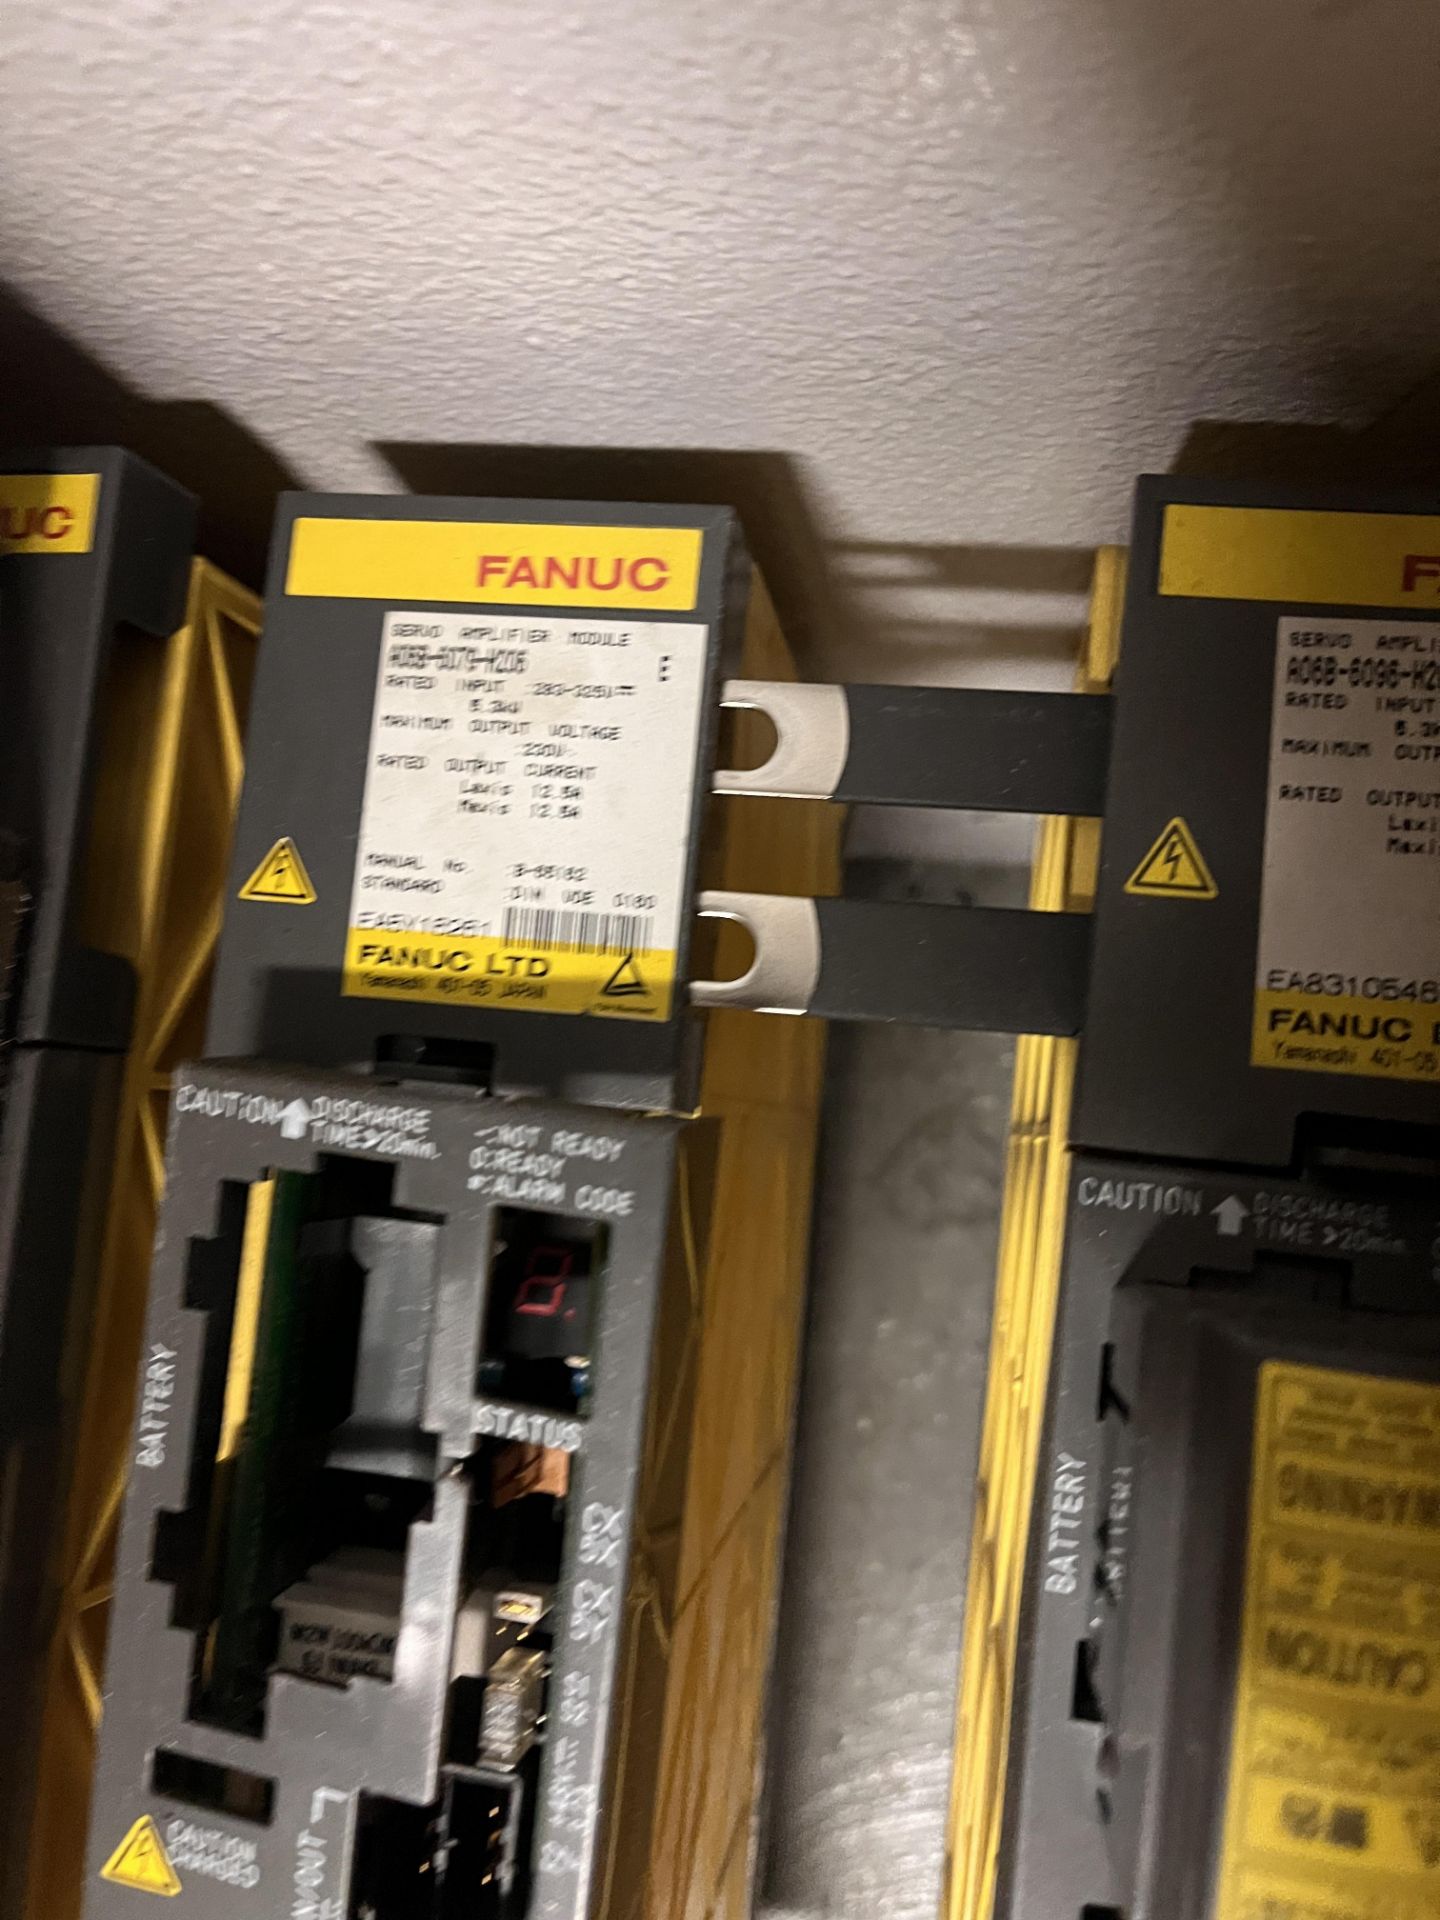 Fanuc Drive Parts with Manuals - Image 5 of 7